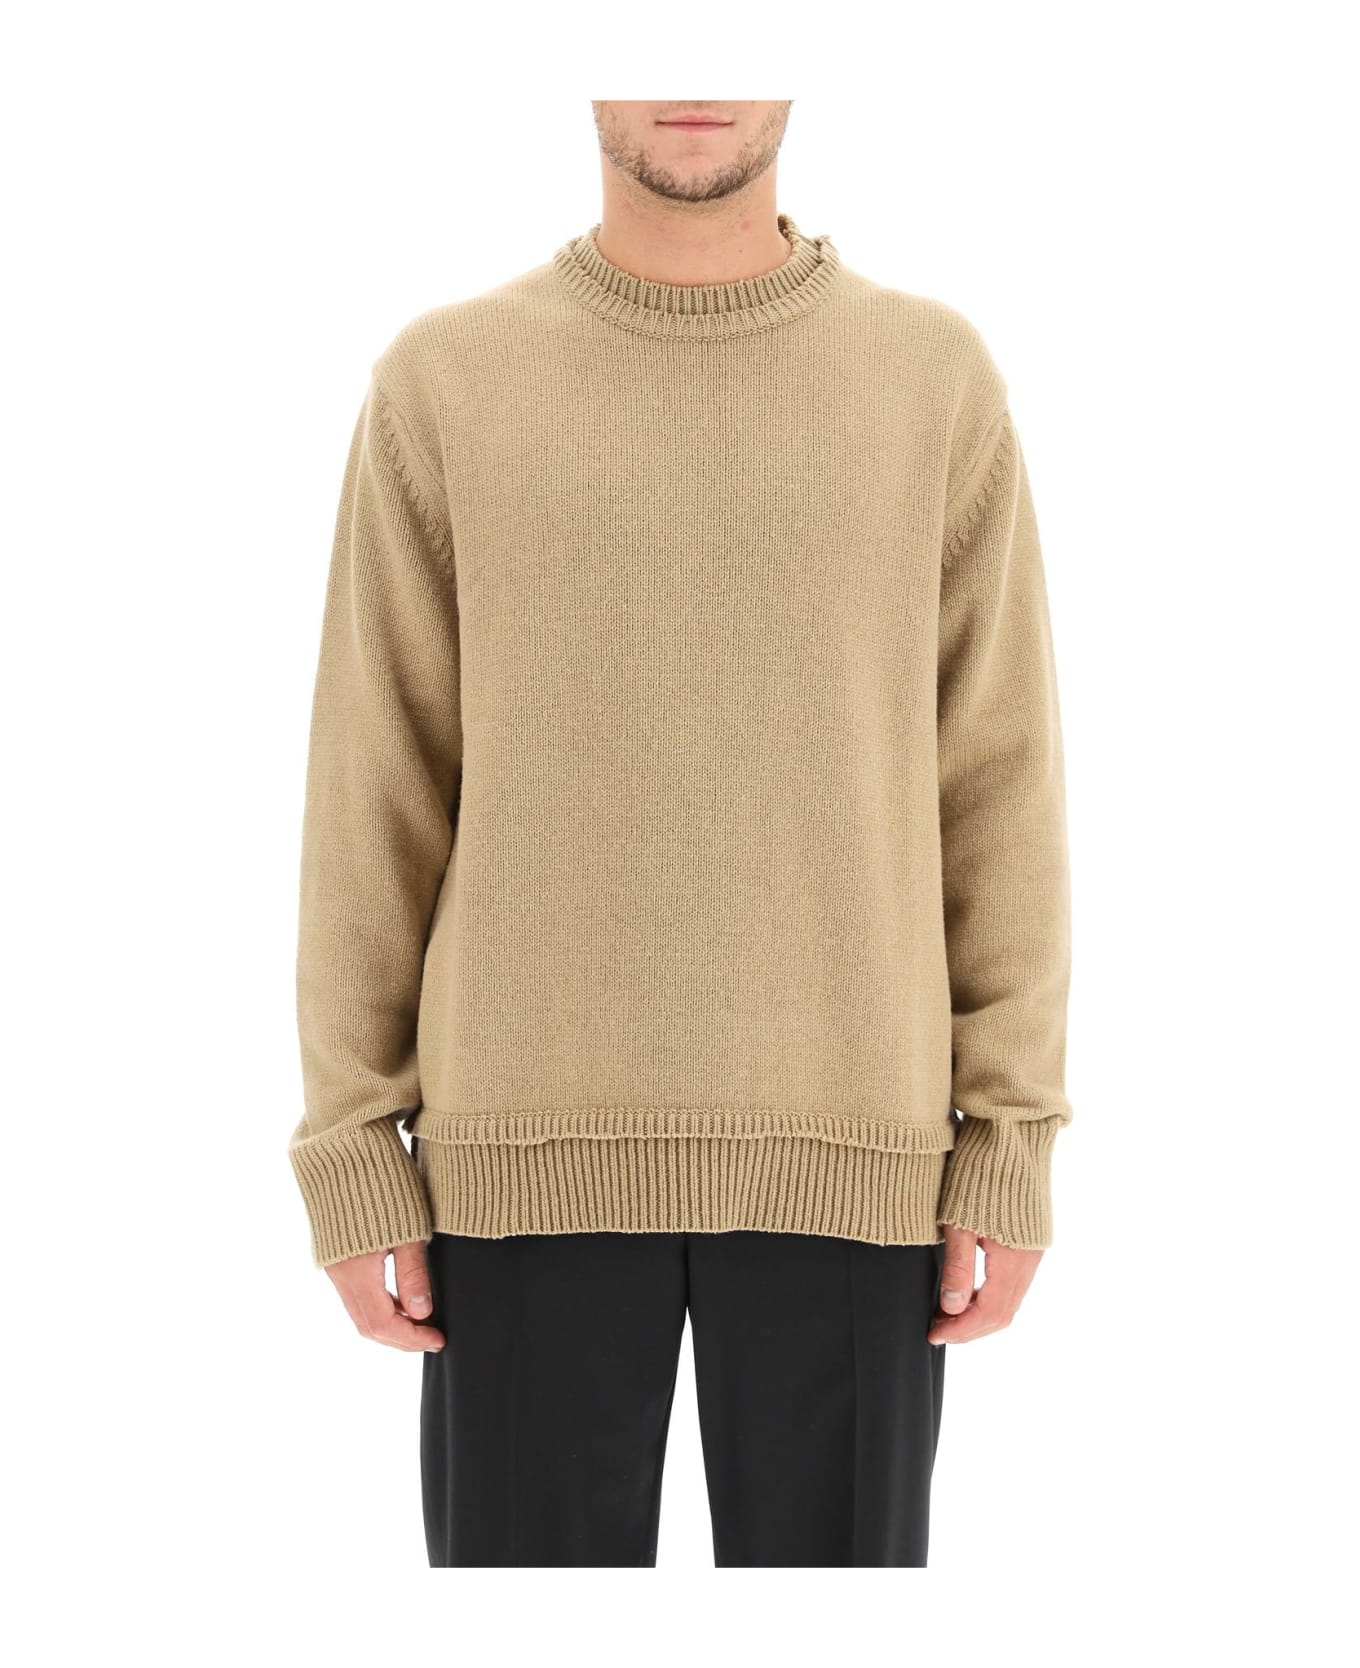 Maison Margiela Crew Neck Sweater With Elbow Patches - Beige